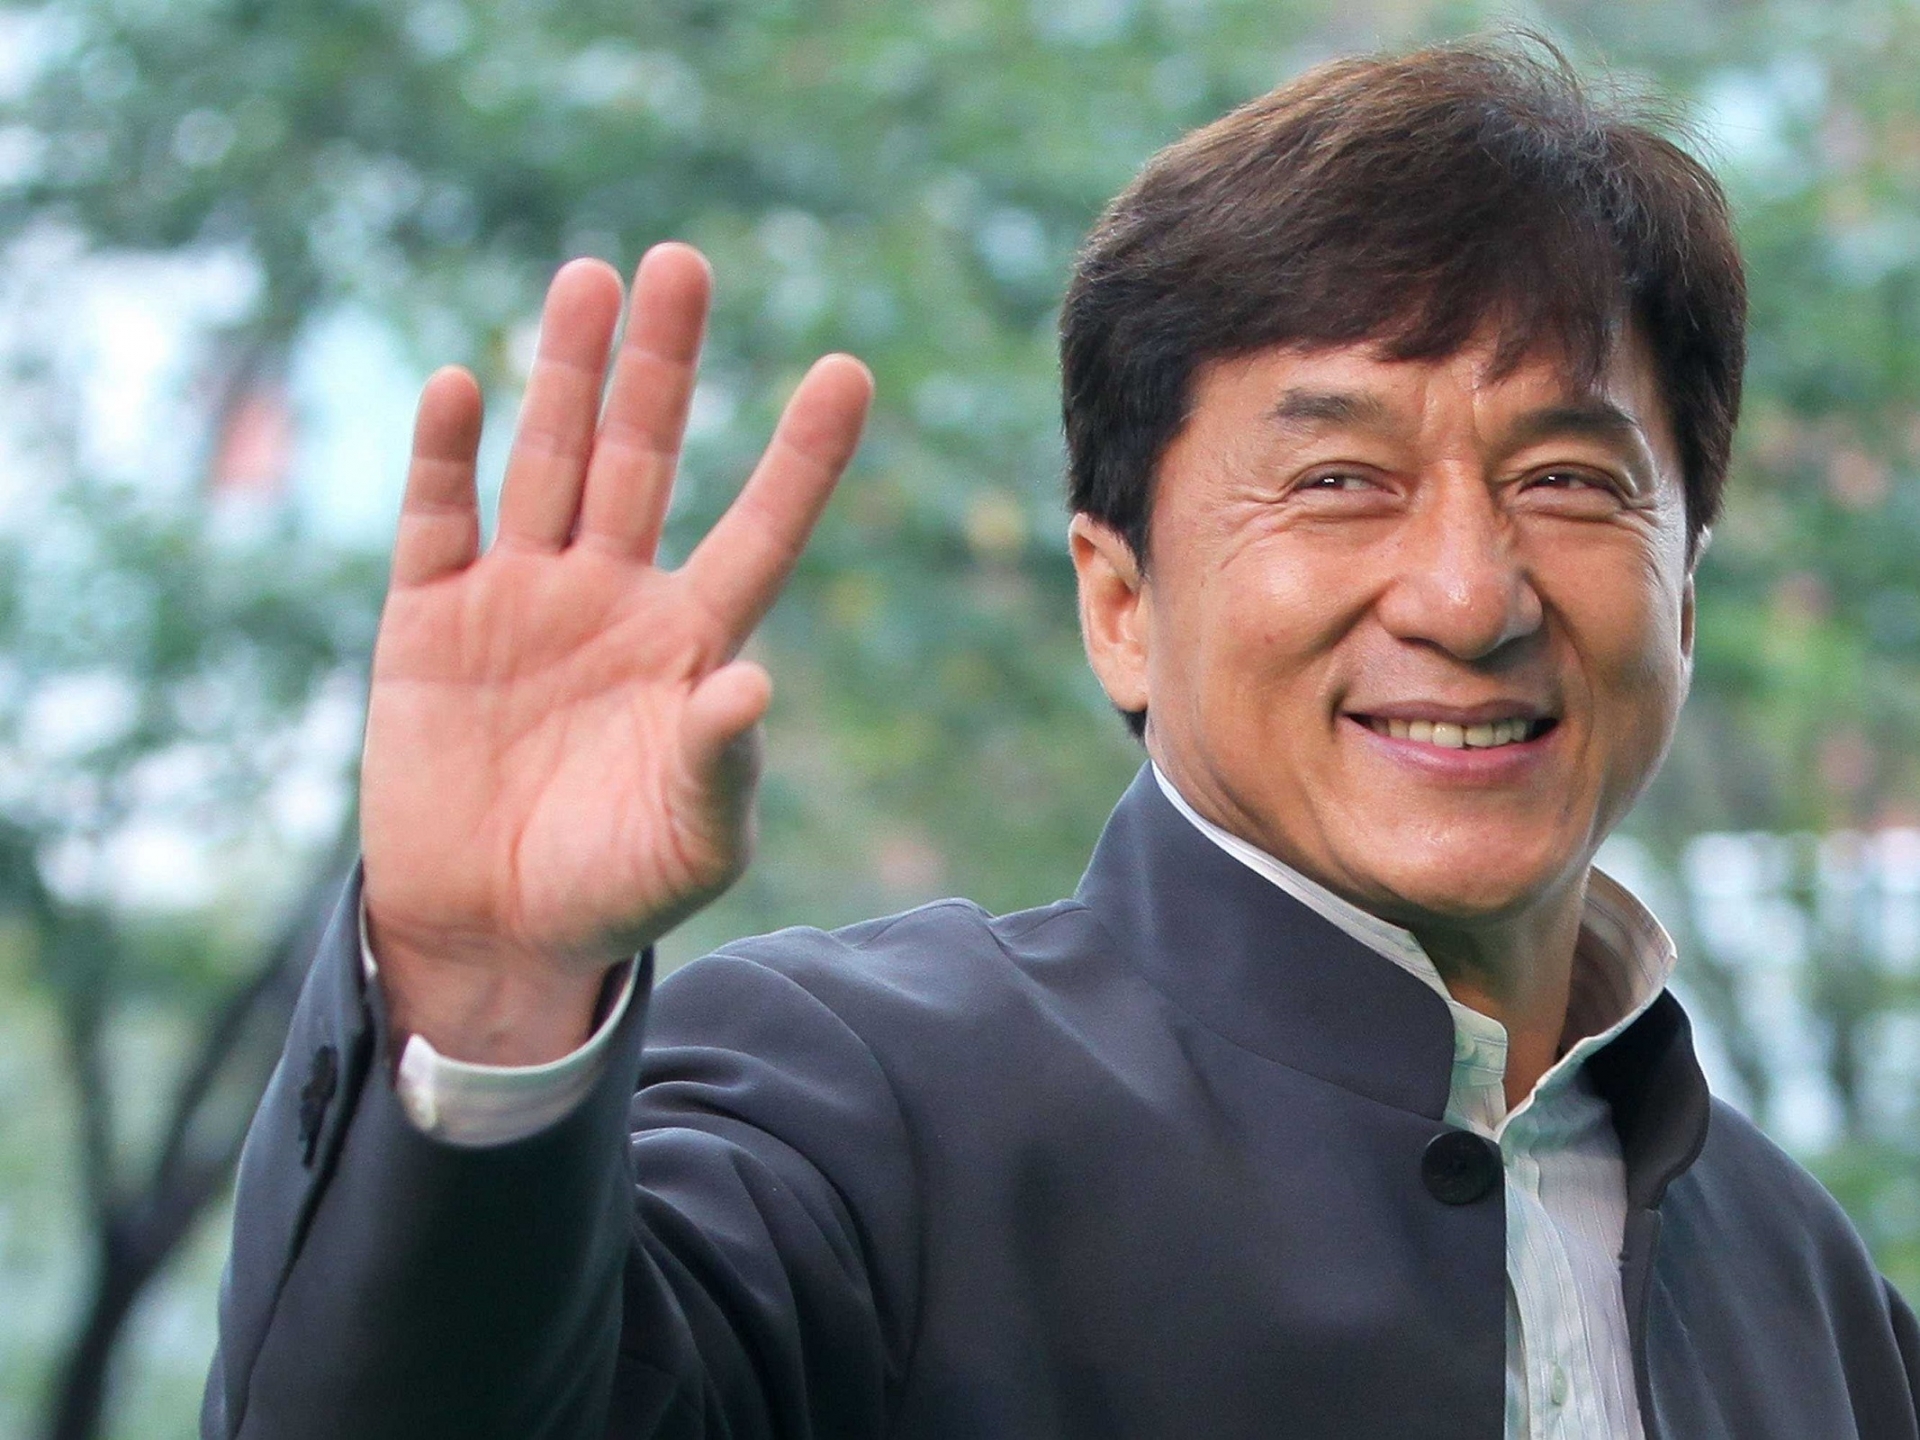 As ambassador for Embraer, Jackie Chan is in a unique position to use this luxury product to grow his empire and do good for many people around the world